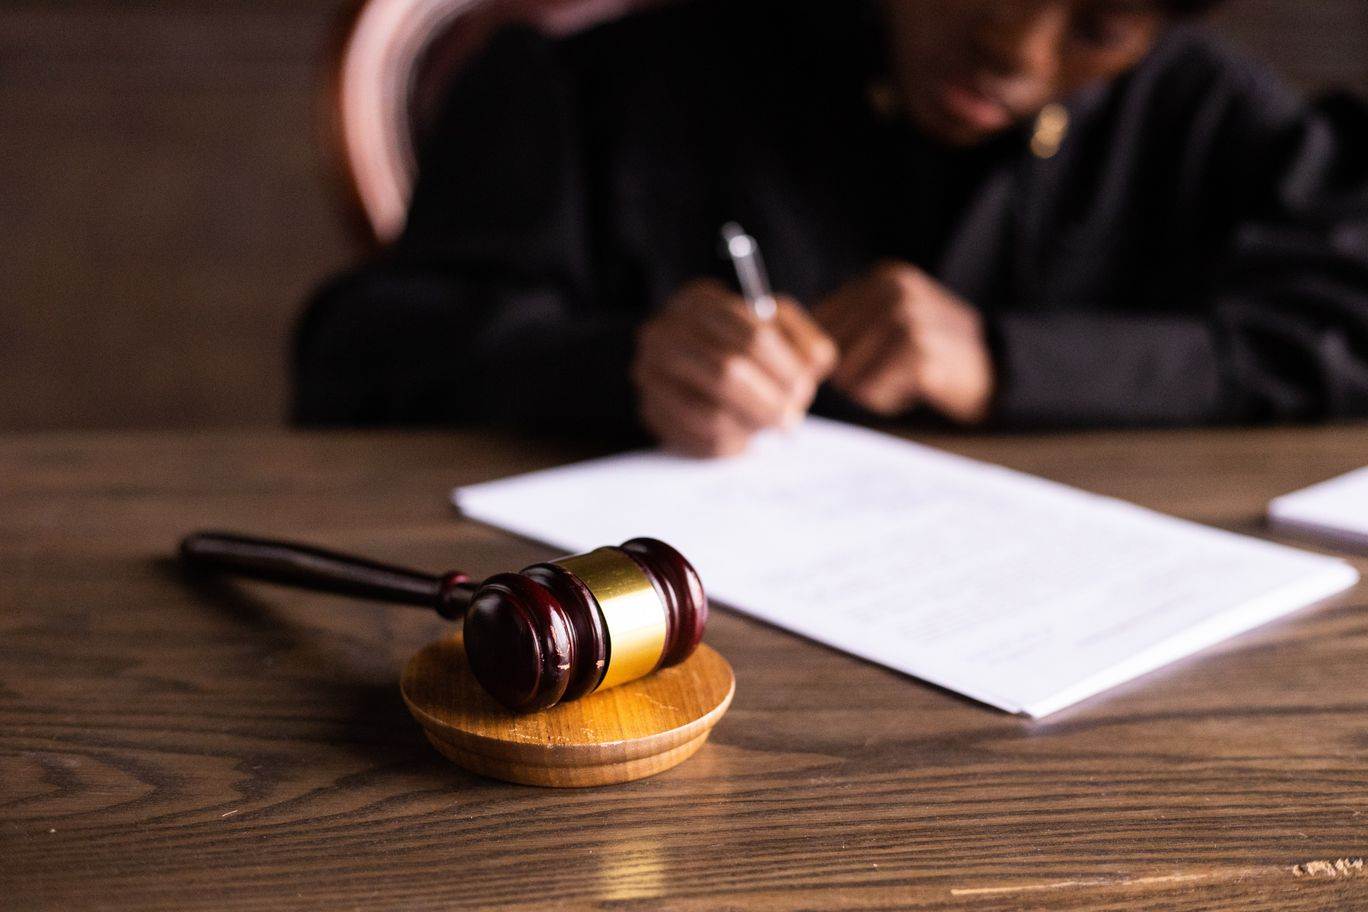 A person in black judge's robes sits at a desk and signs papers. The focus is on a gavel that sits on the desk. 